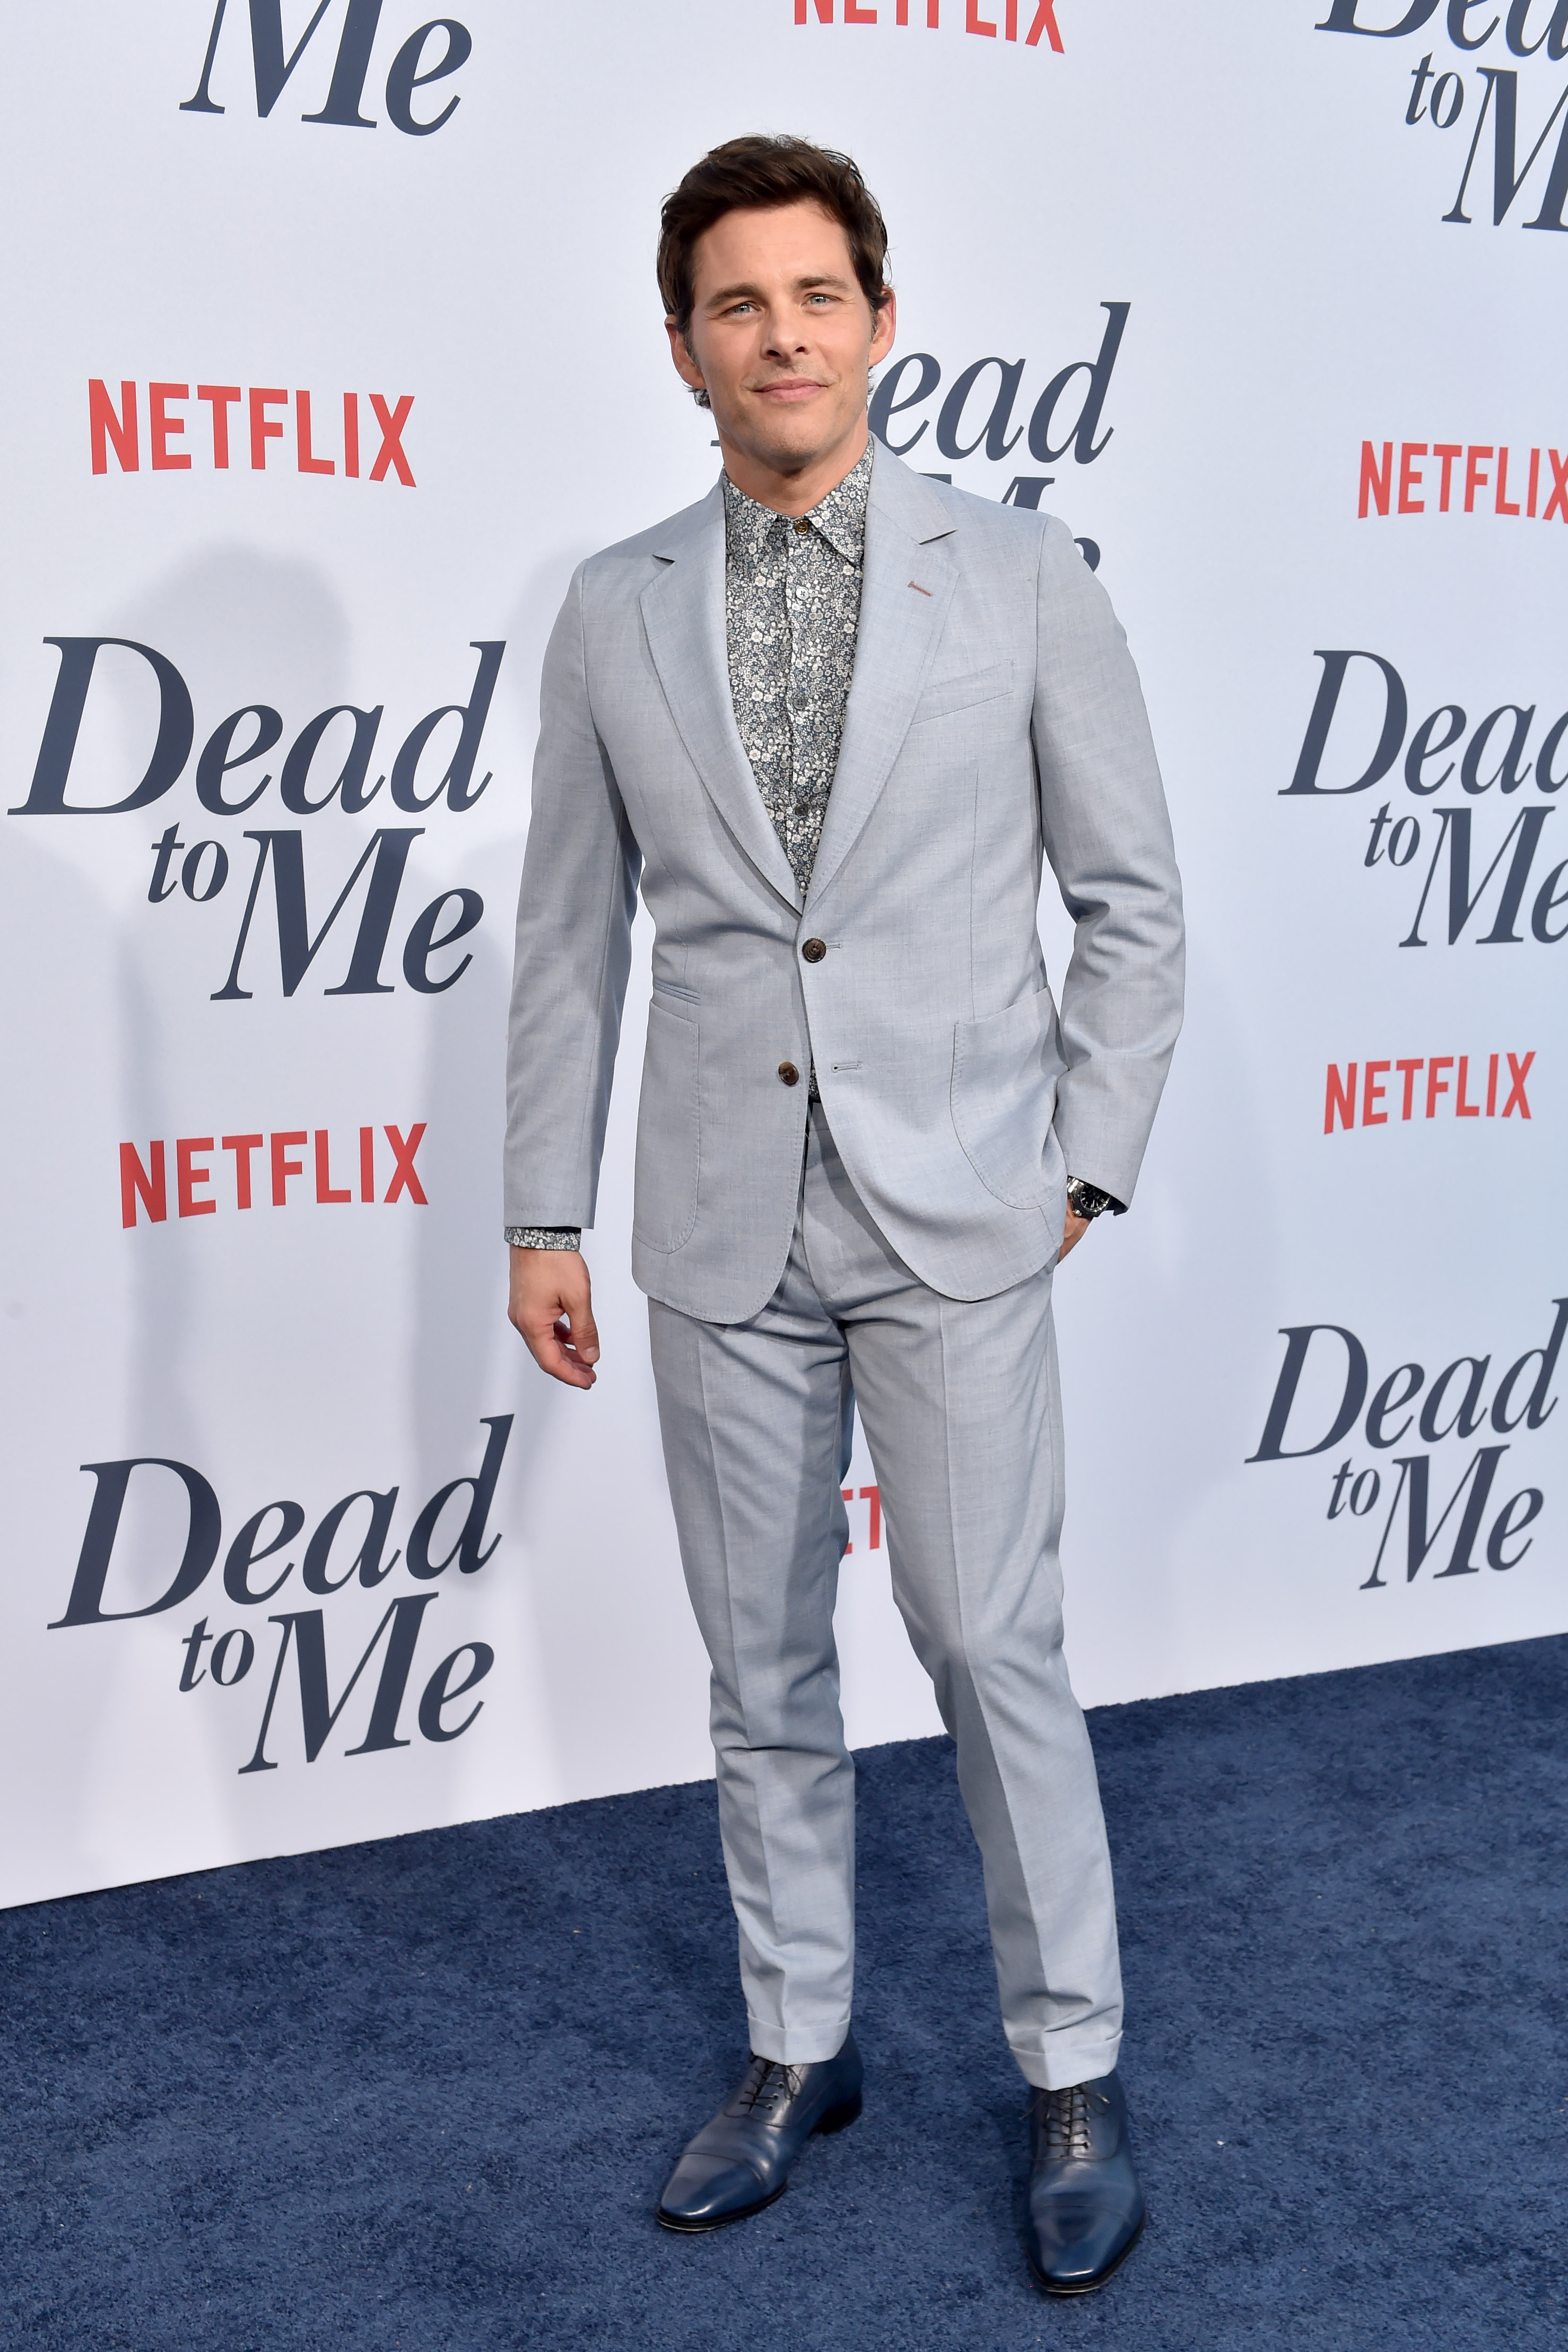 The Full 'Dead to Me' Cast - Who Plays the Characters on Netflix's